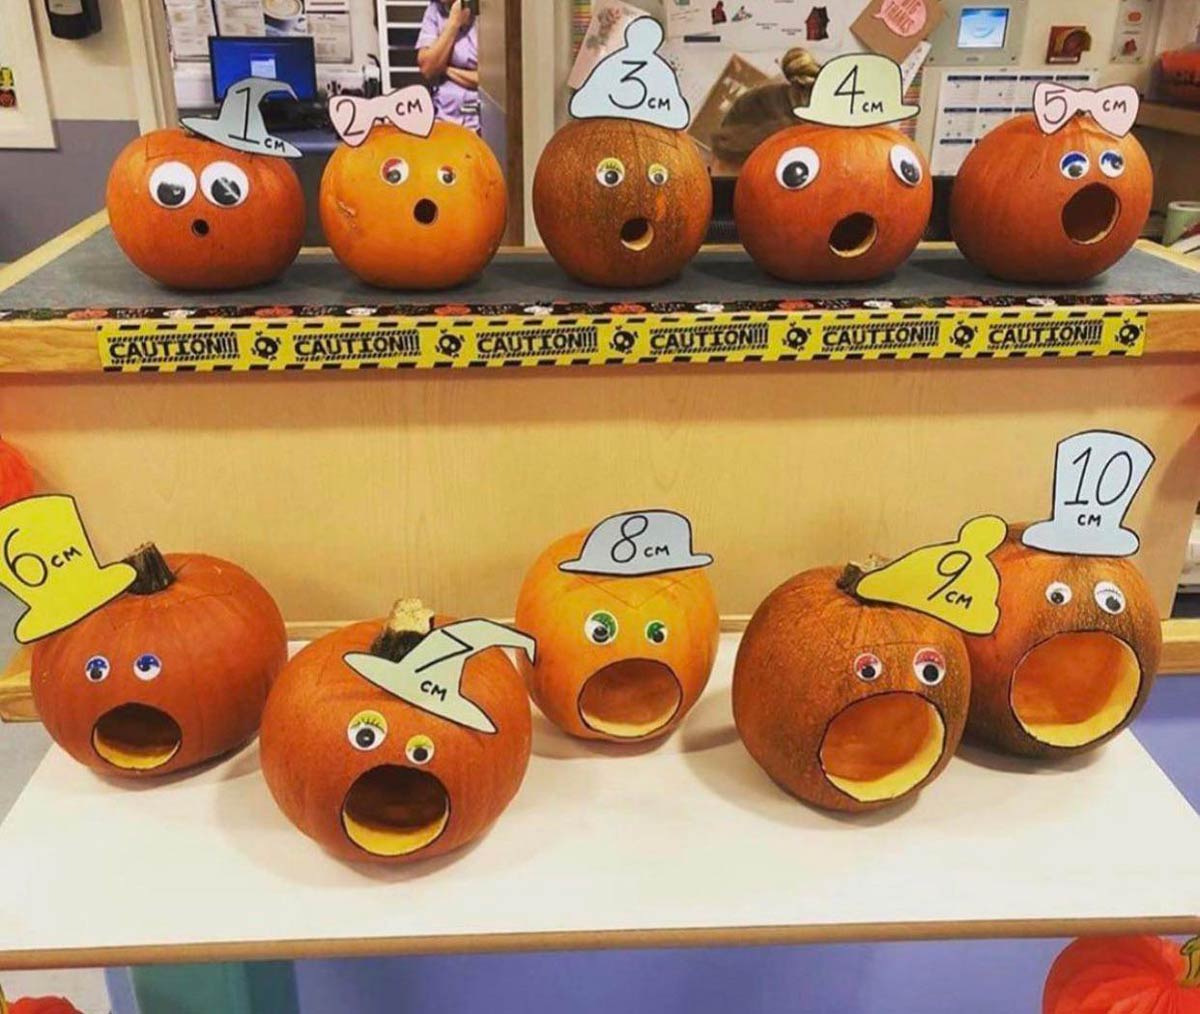 "Dilation pumpkins" made by midwives at a hospital, disturbing but funny